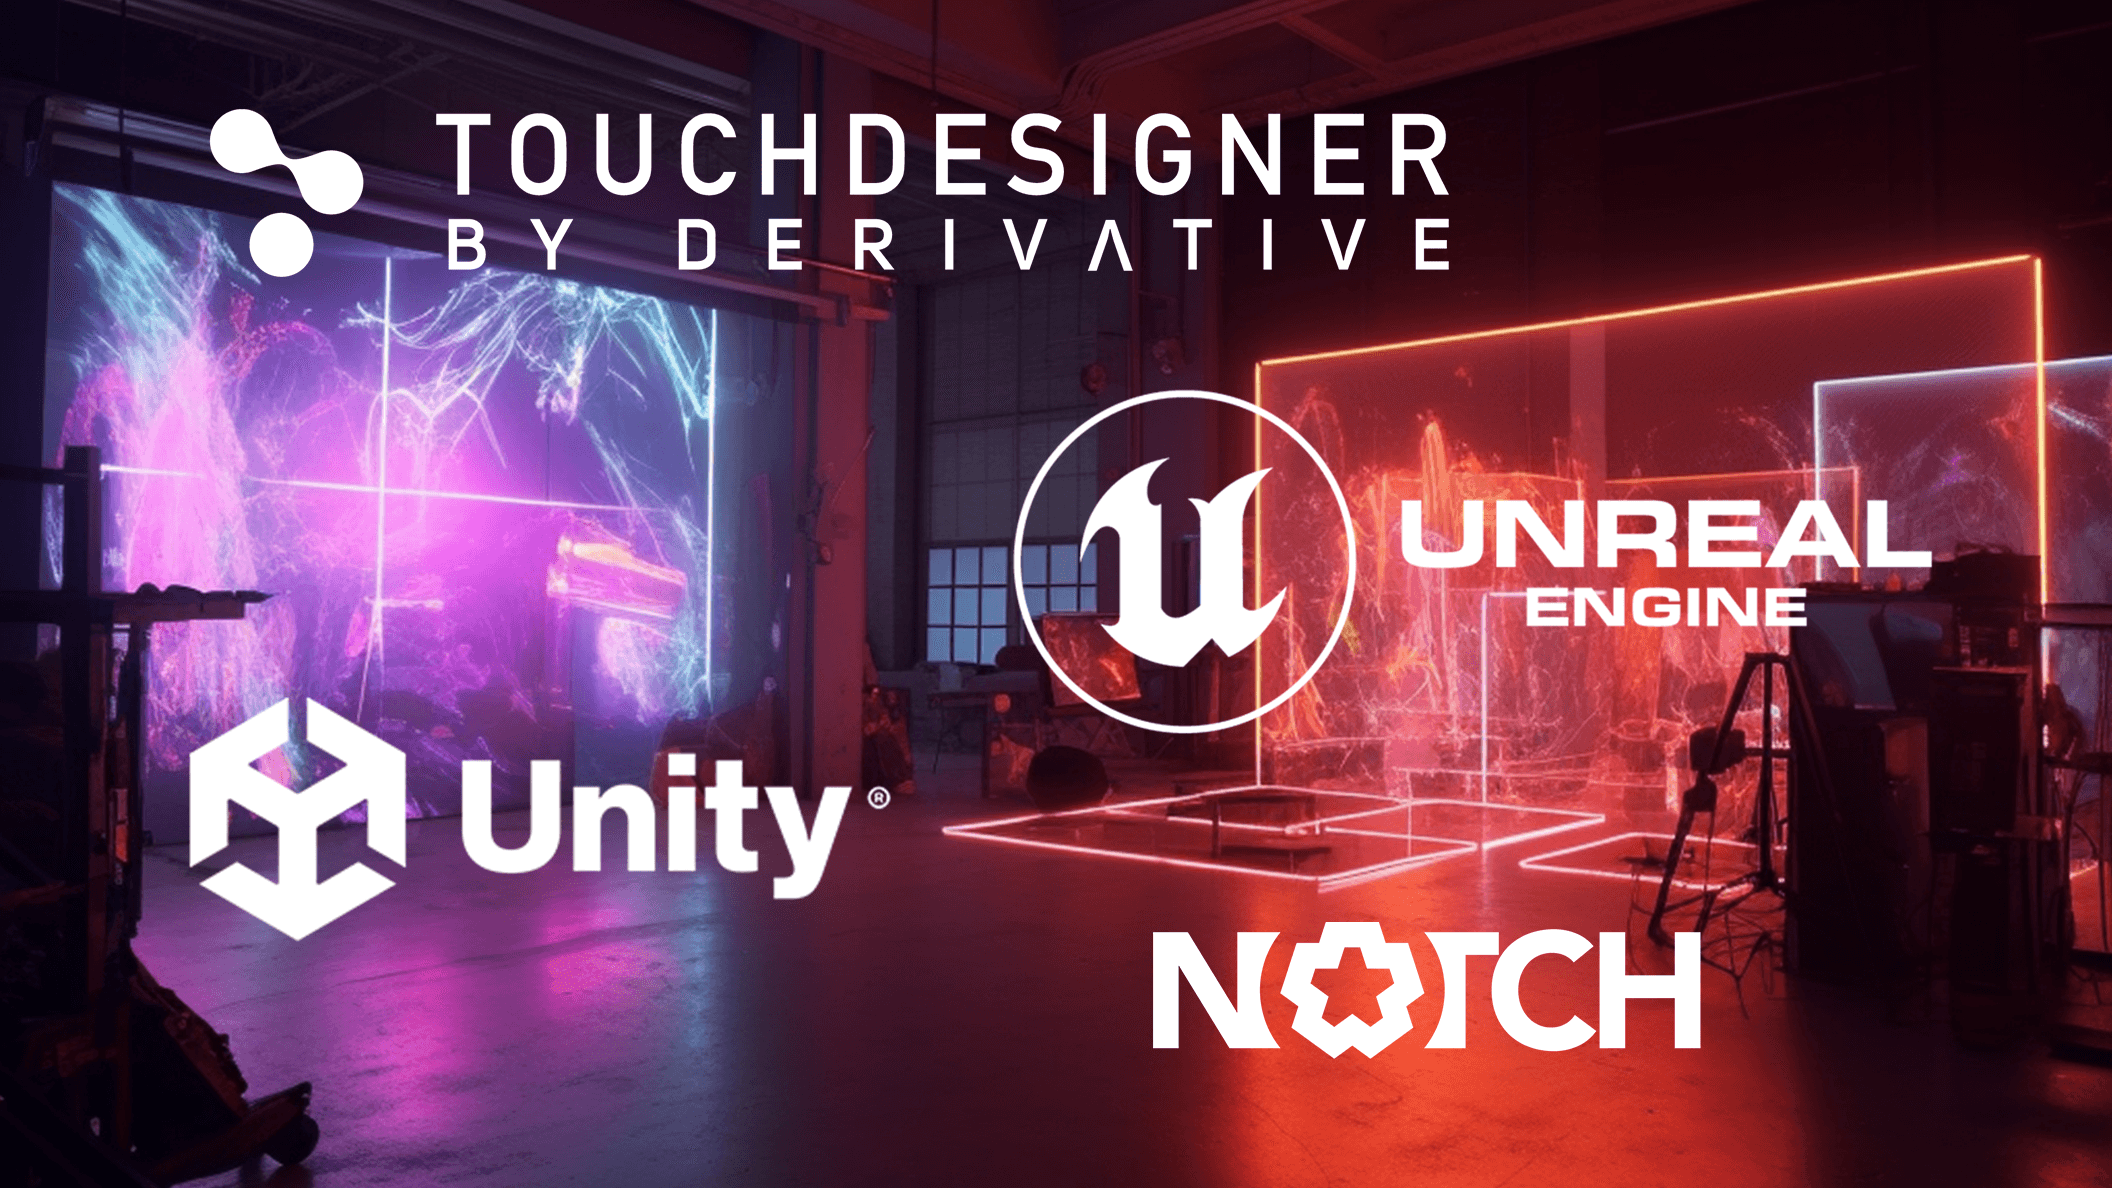 Media lab on a background with the logos of Touch Designer, Unity, Unreal Engine, and Notch, representing Screenbery's integration with real-time graphics software